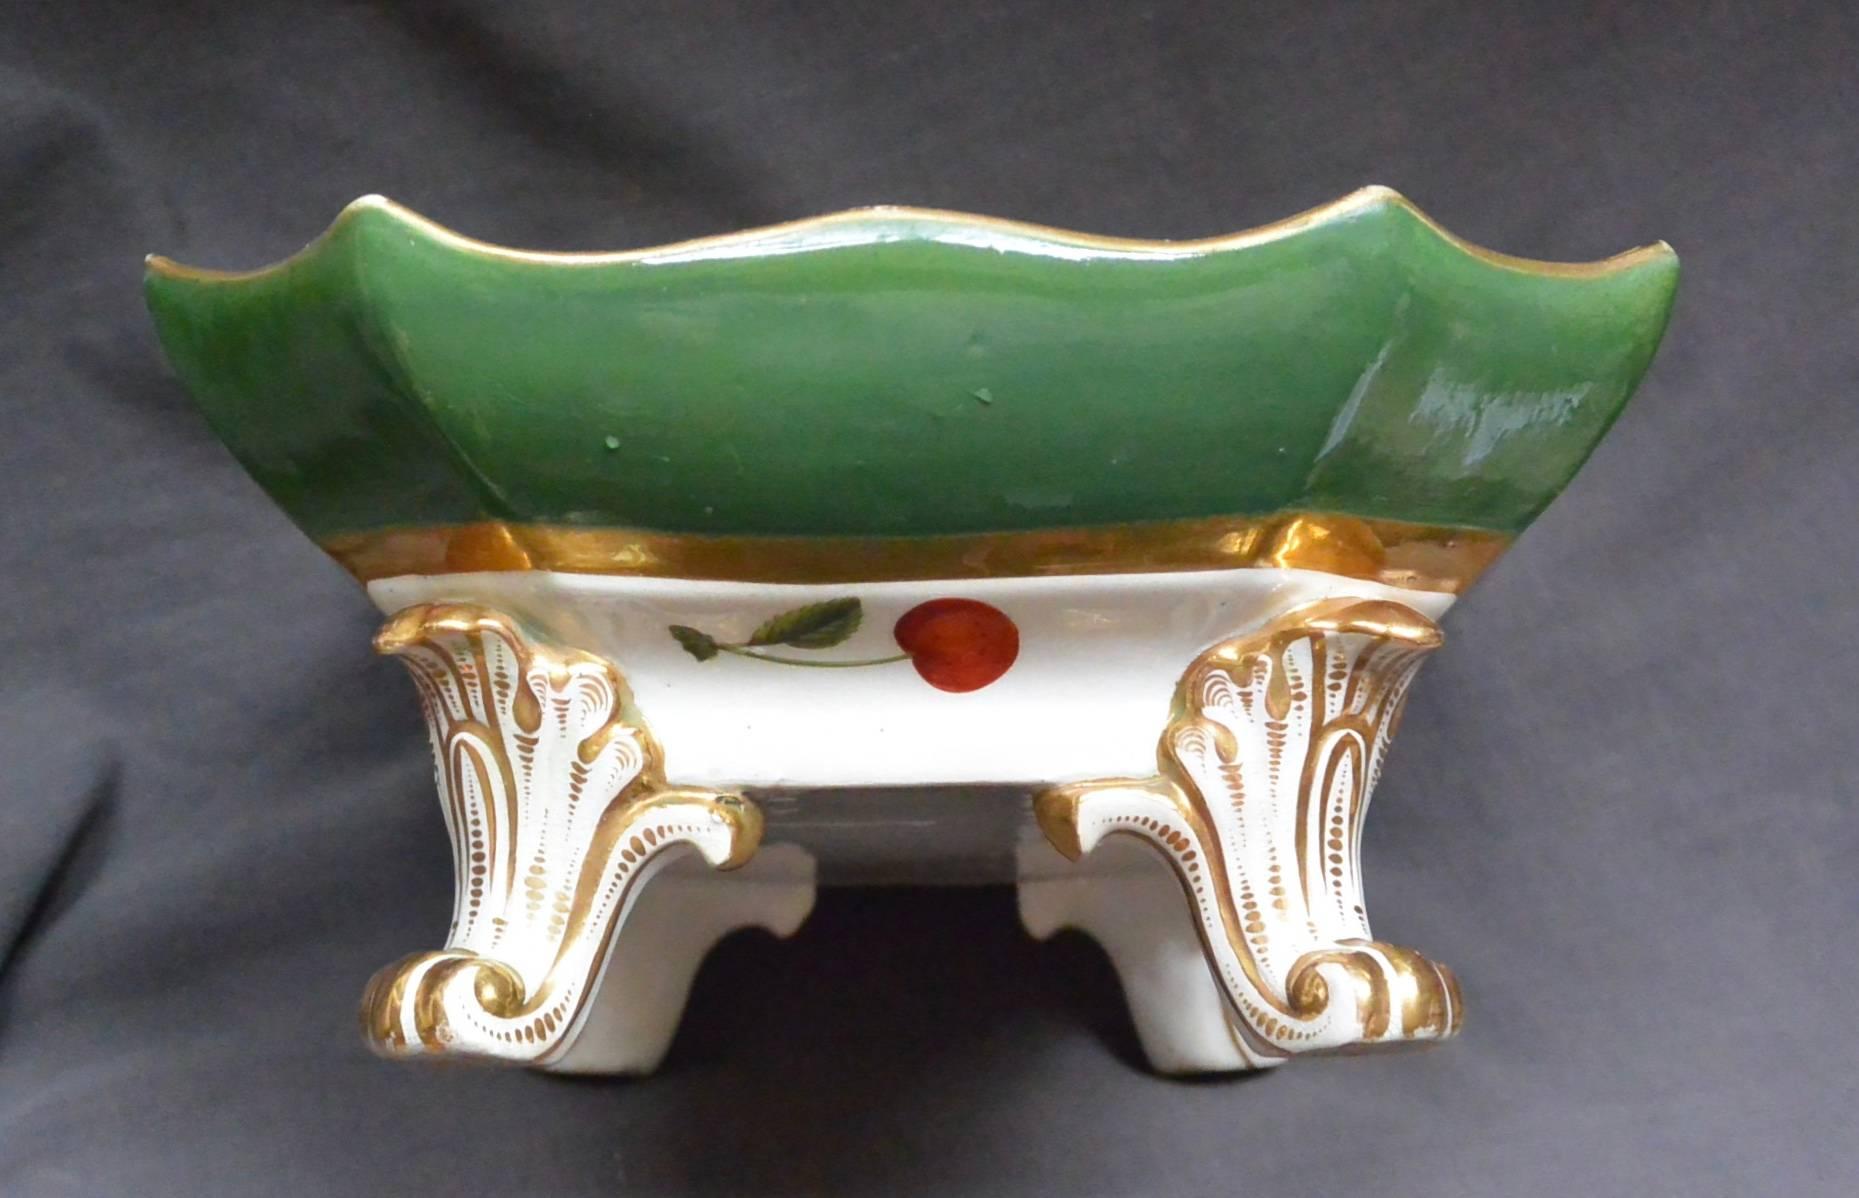 Purple and green gilt porcelain flower and fruit compote. Eight sided and shaped botanical themed strikingly painted green, purple and gold serving dish with green band and gilt borders, centering on painted purple and yellow fruit and pansies, all